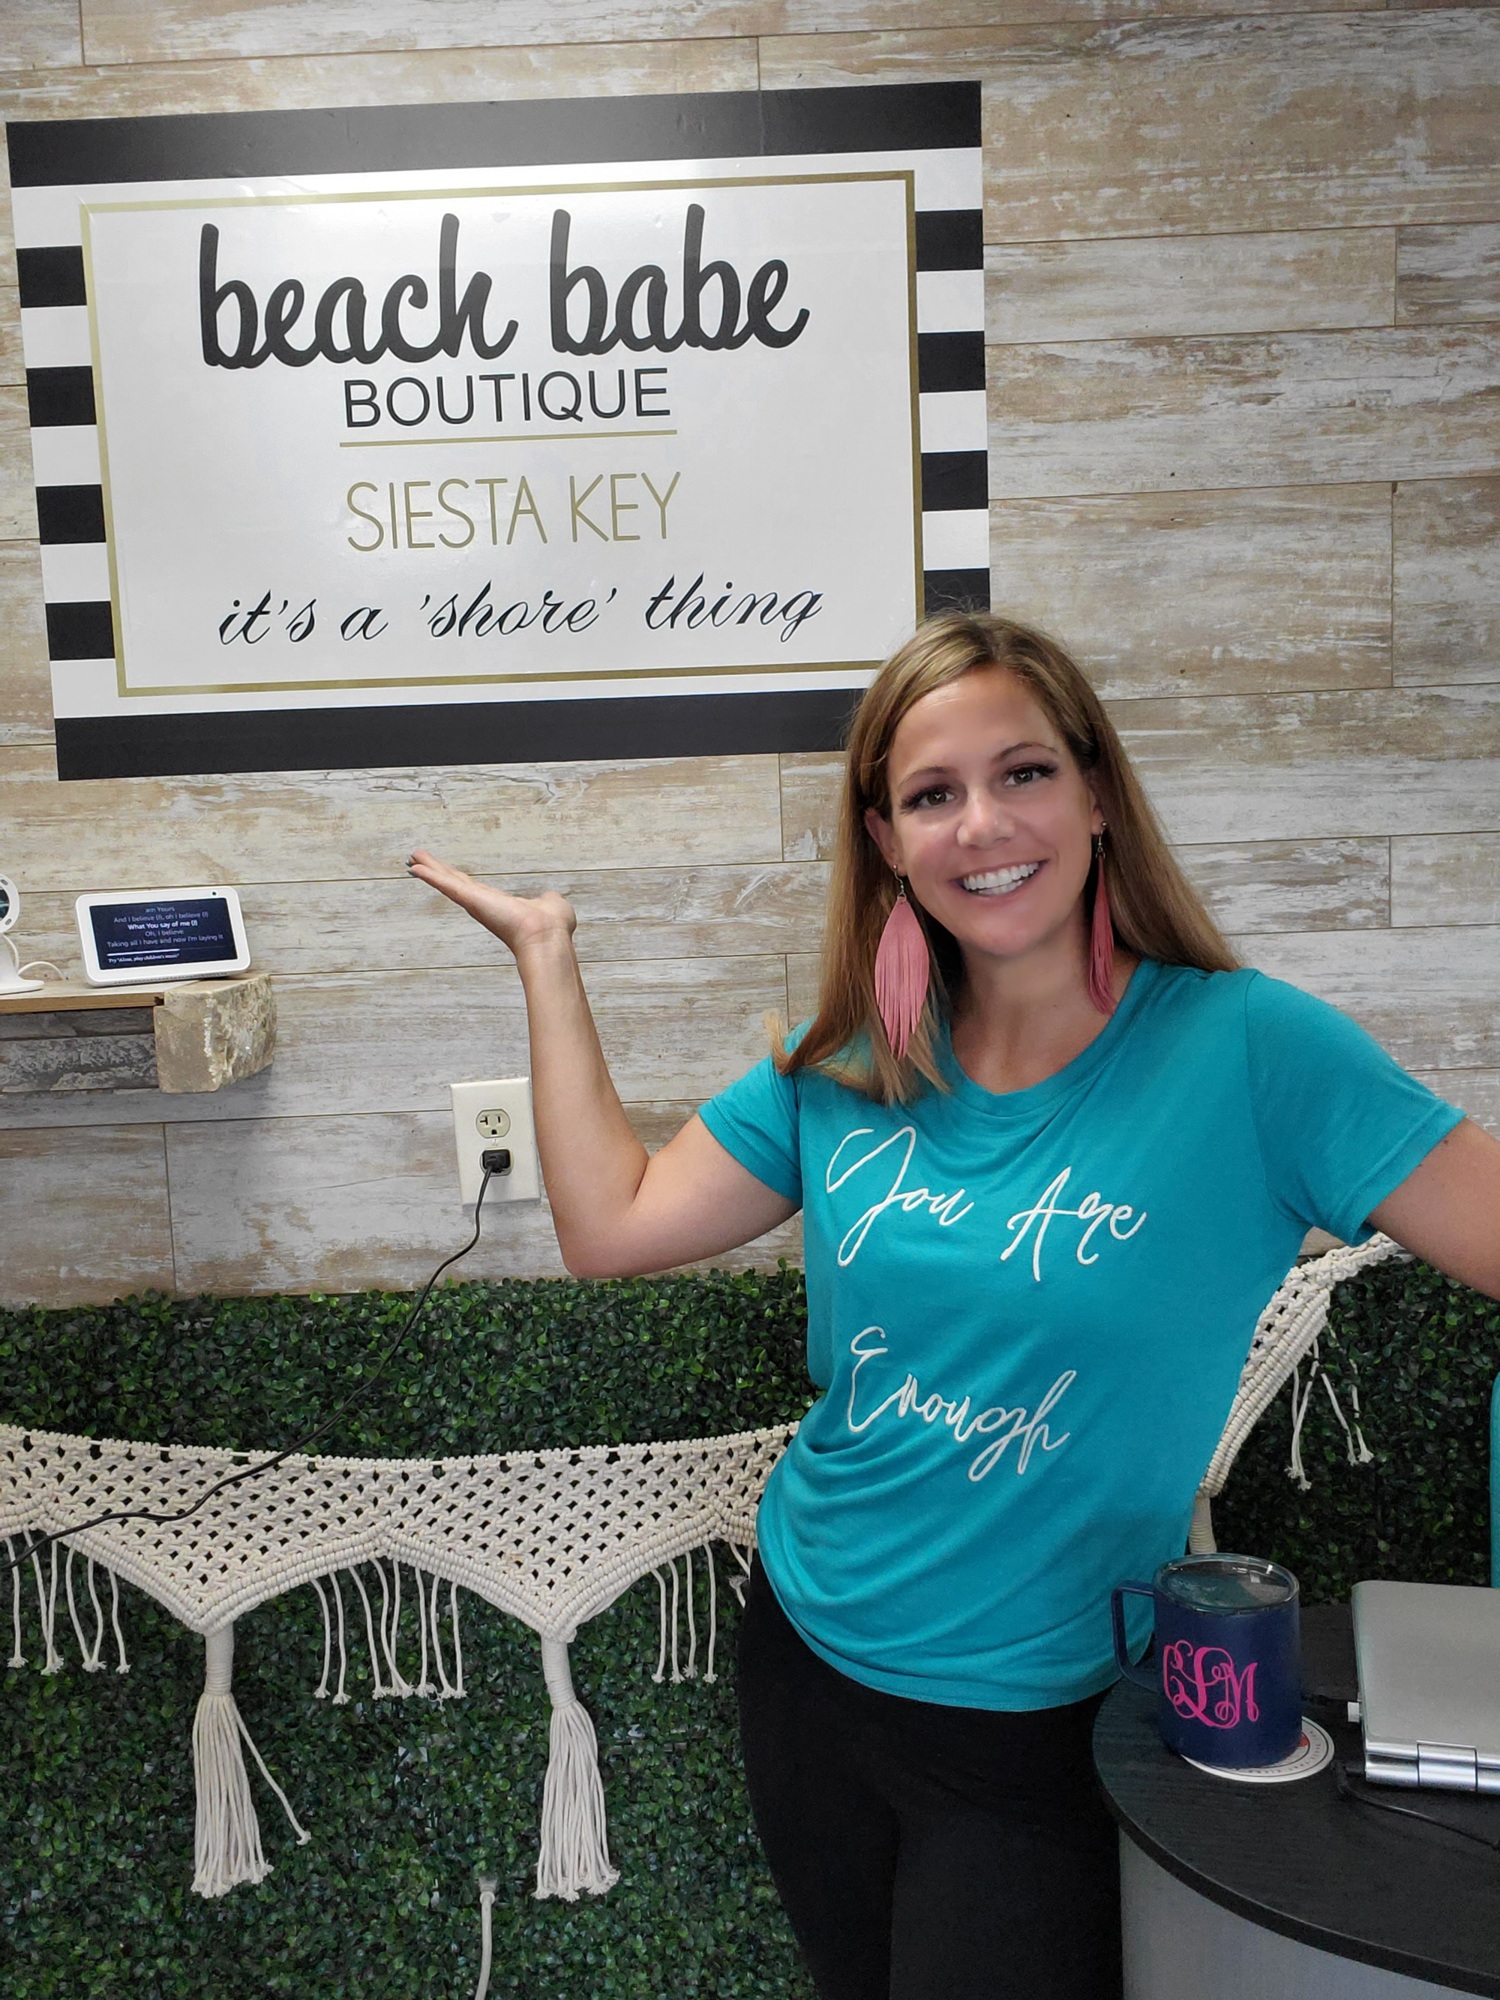 Courtesy. Christin Lilly is the owner of Beach Babe Boutique on Siesta Key. She also has plans for a second location.